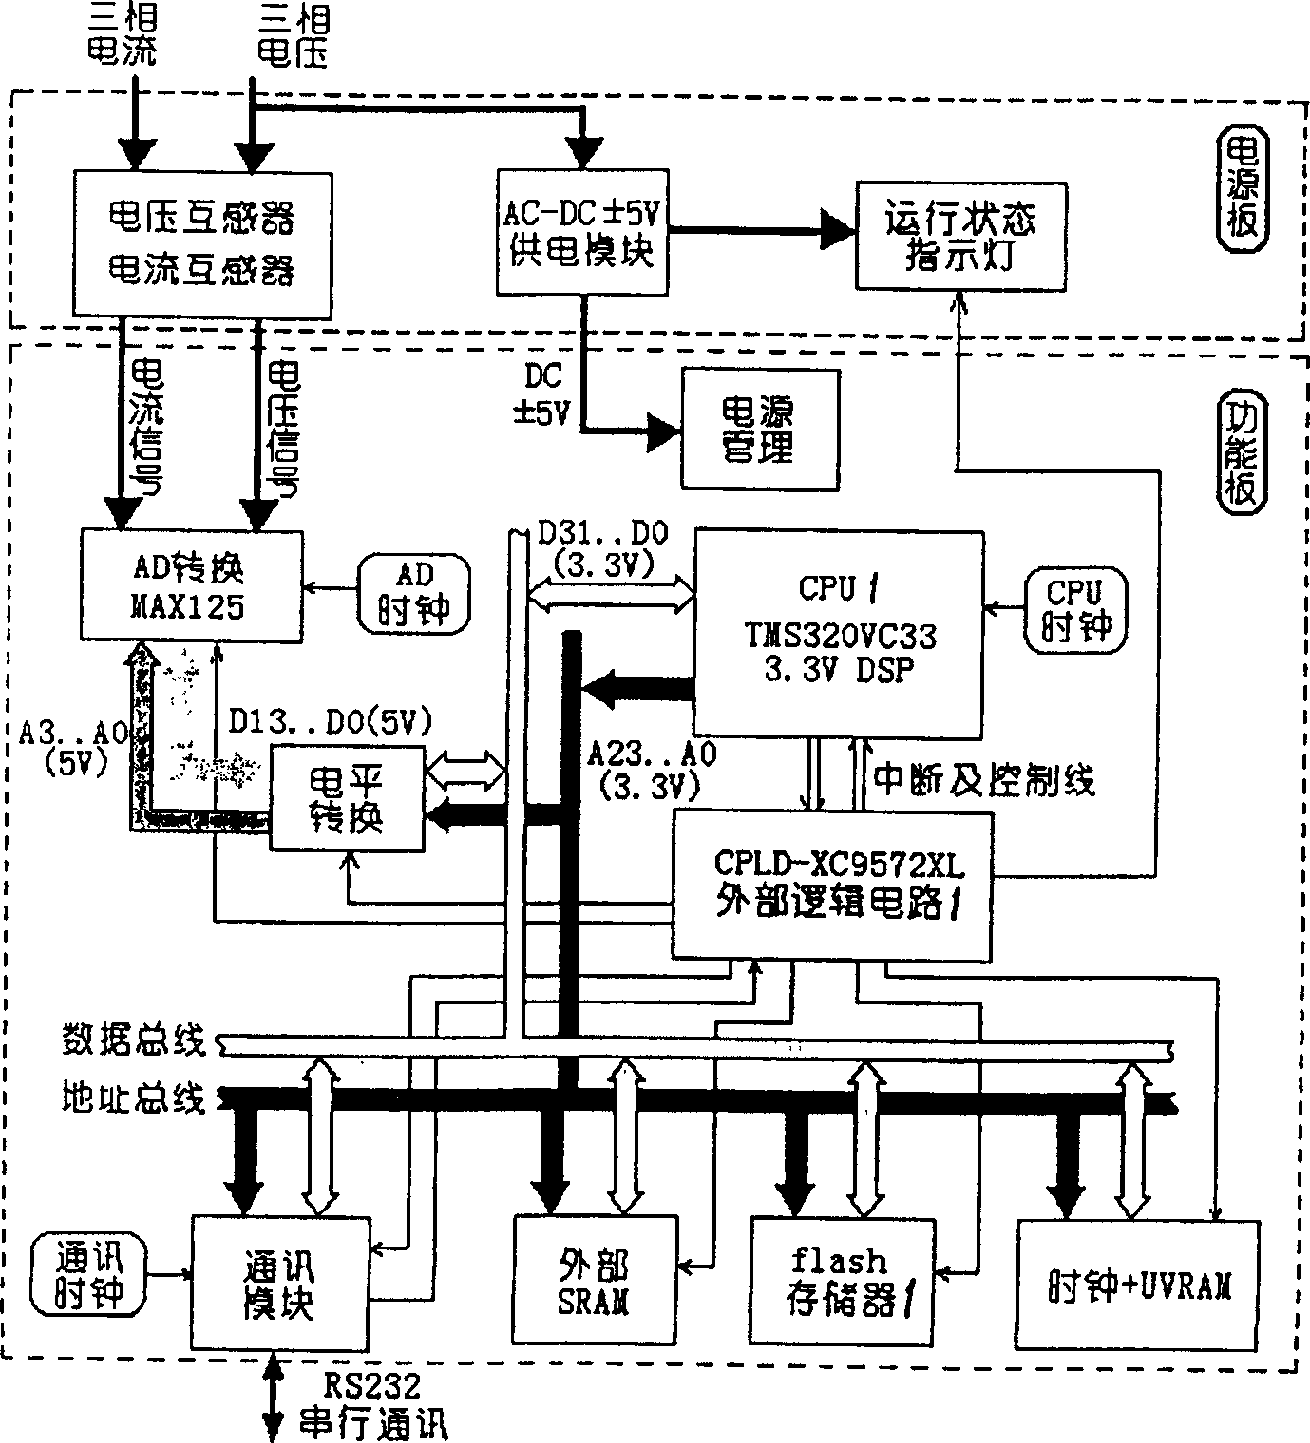 Radio communication type comprehensive power distribution measuring and recording instrument